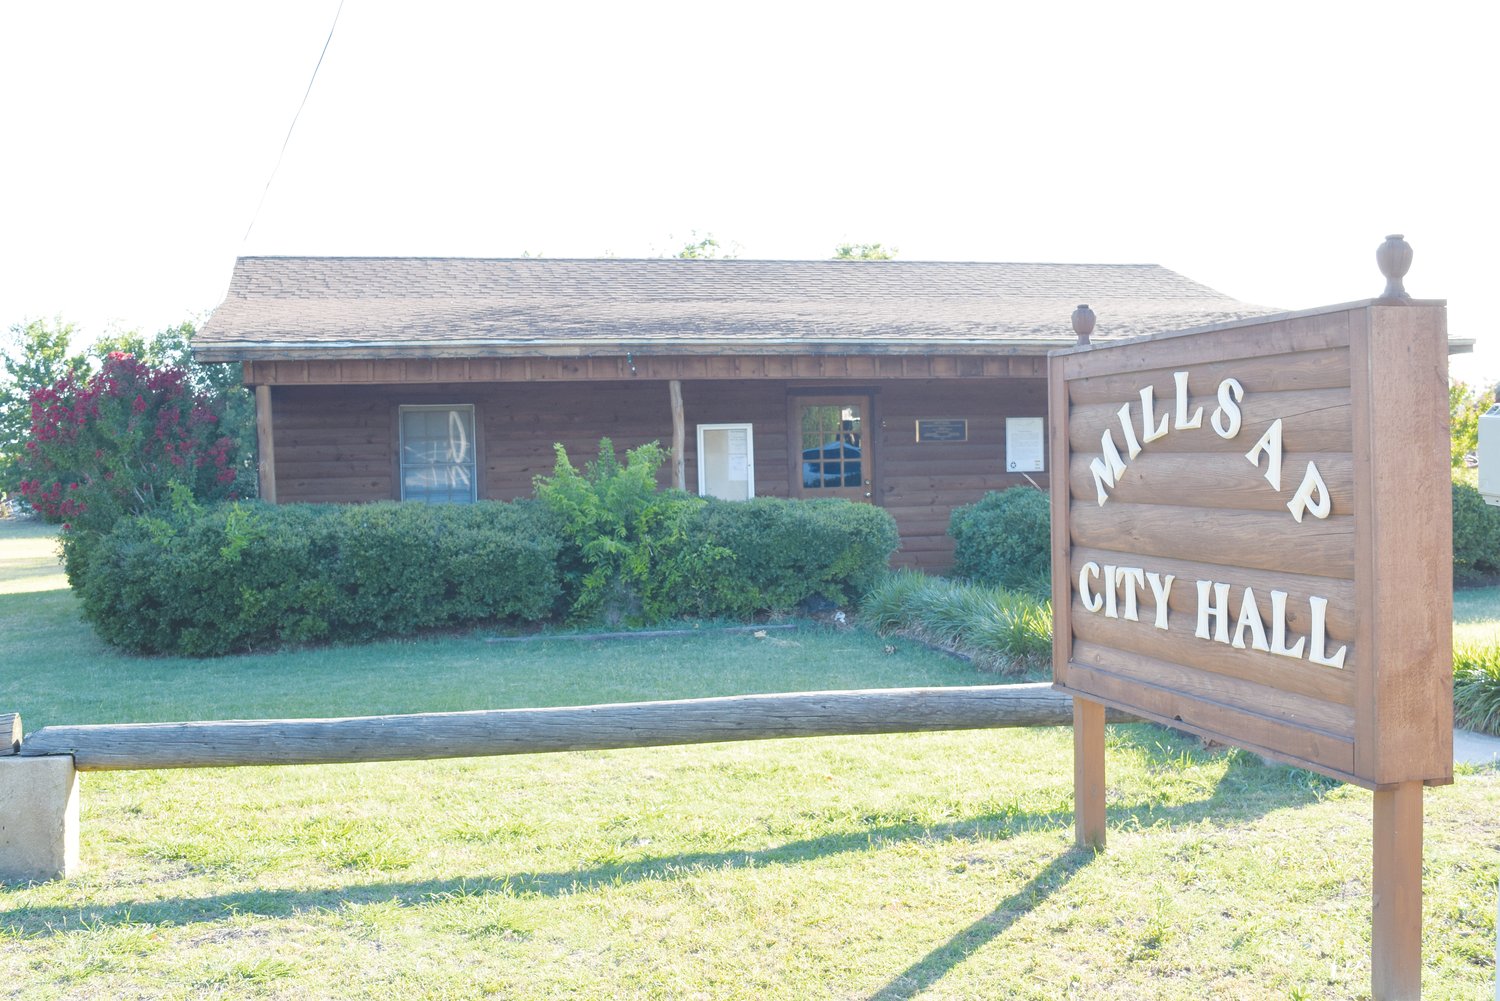 Millsap's original log cabin and post office were moved to the city's Heritage Park.